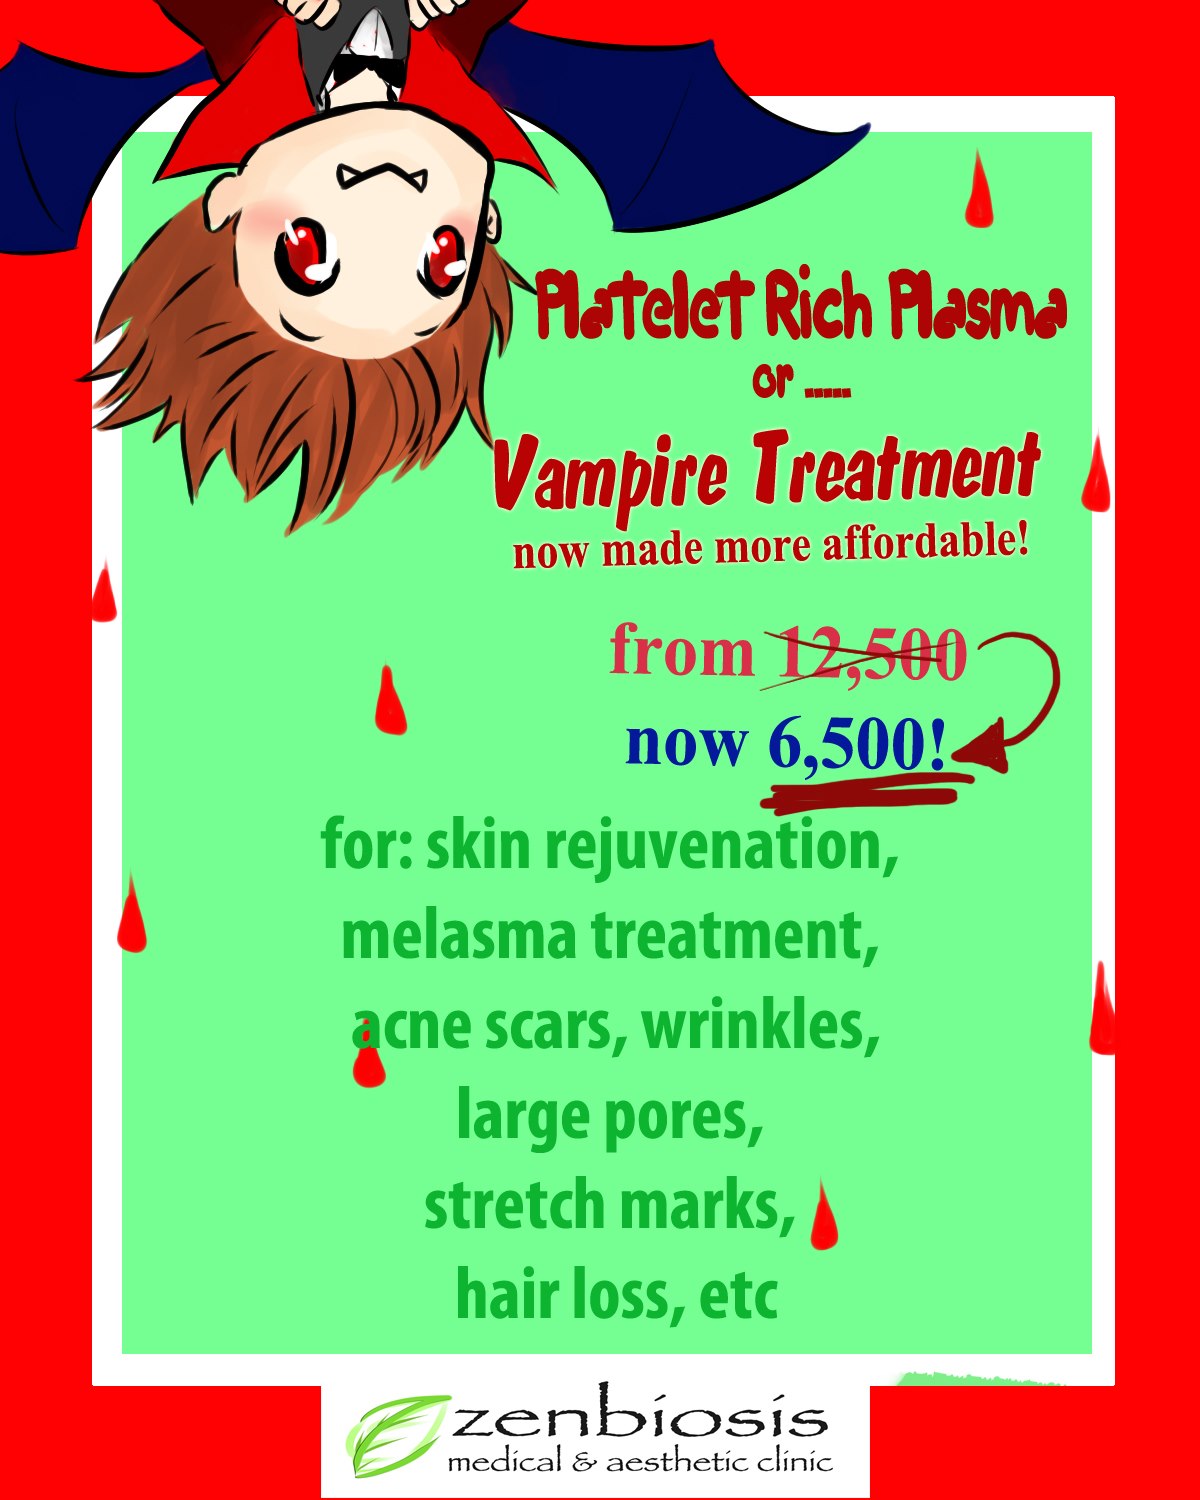 PRP or “Vampire Treatment” Now Made Affordable at Zenbiosis